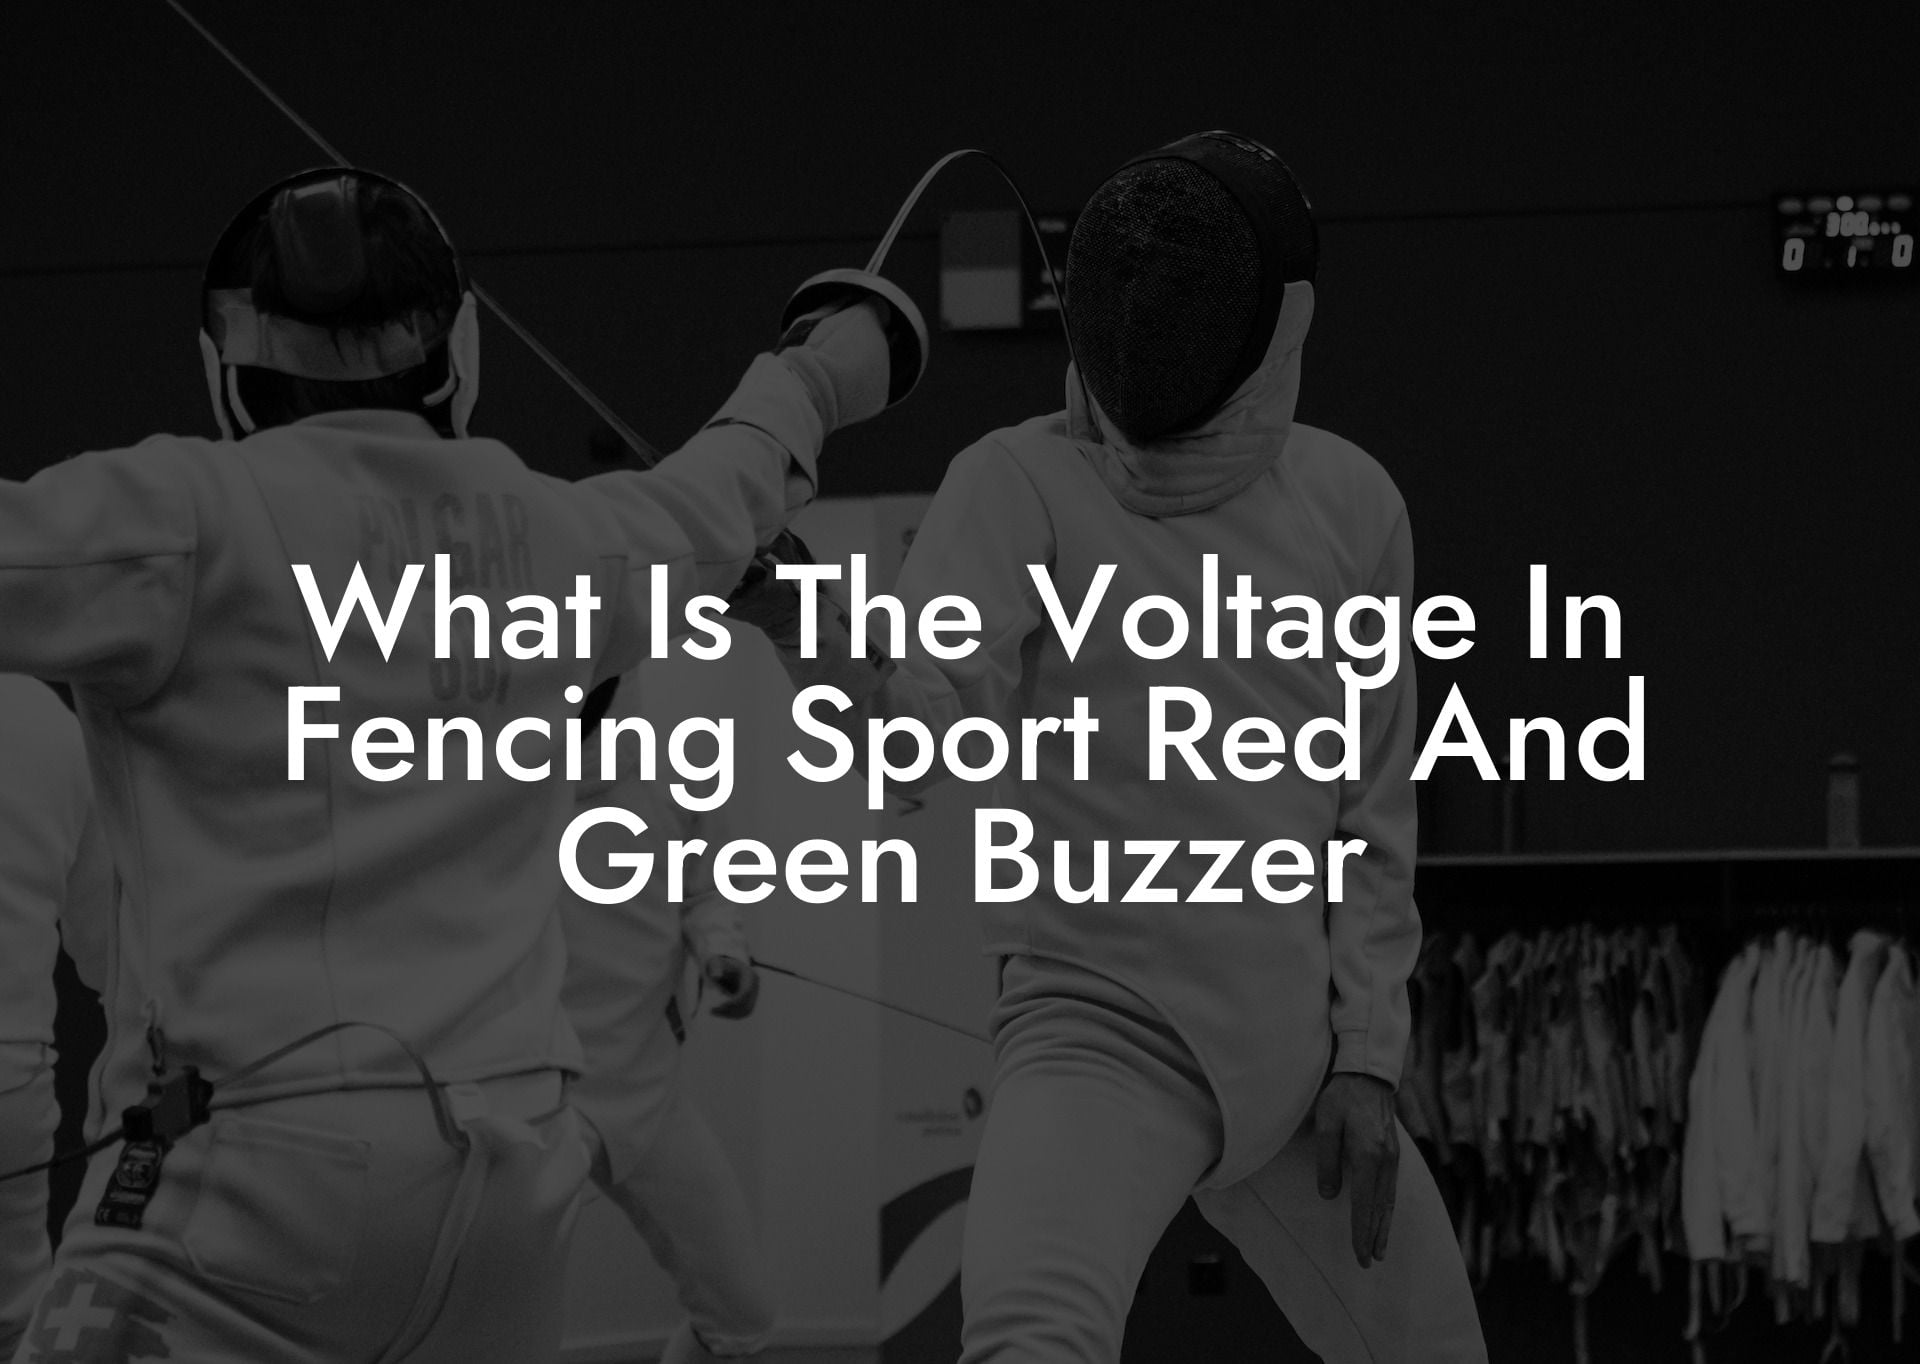 What Is The Voltage In Fencing Sport Red And Green Buzzer